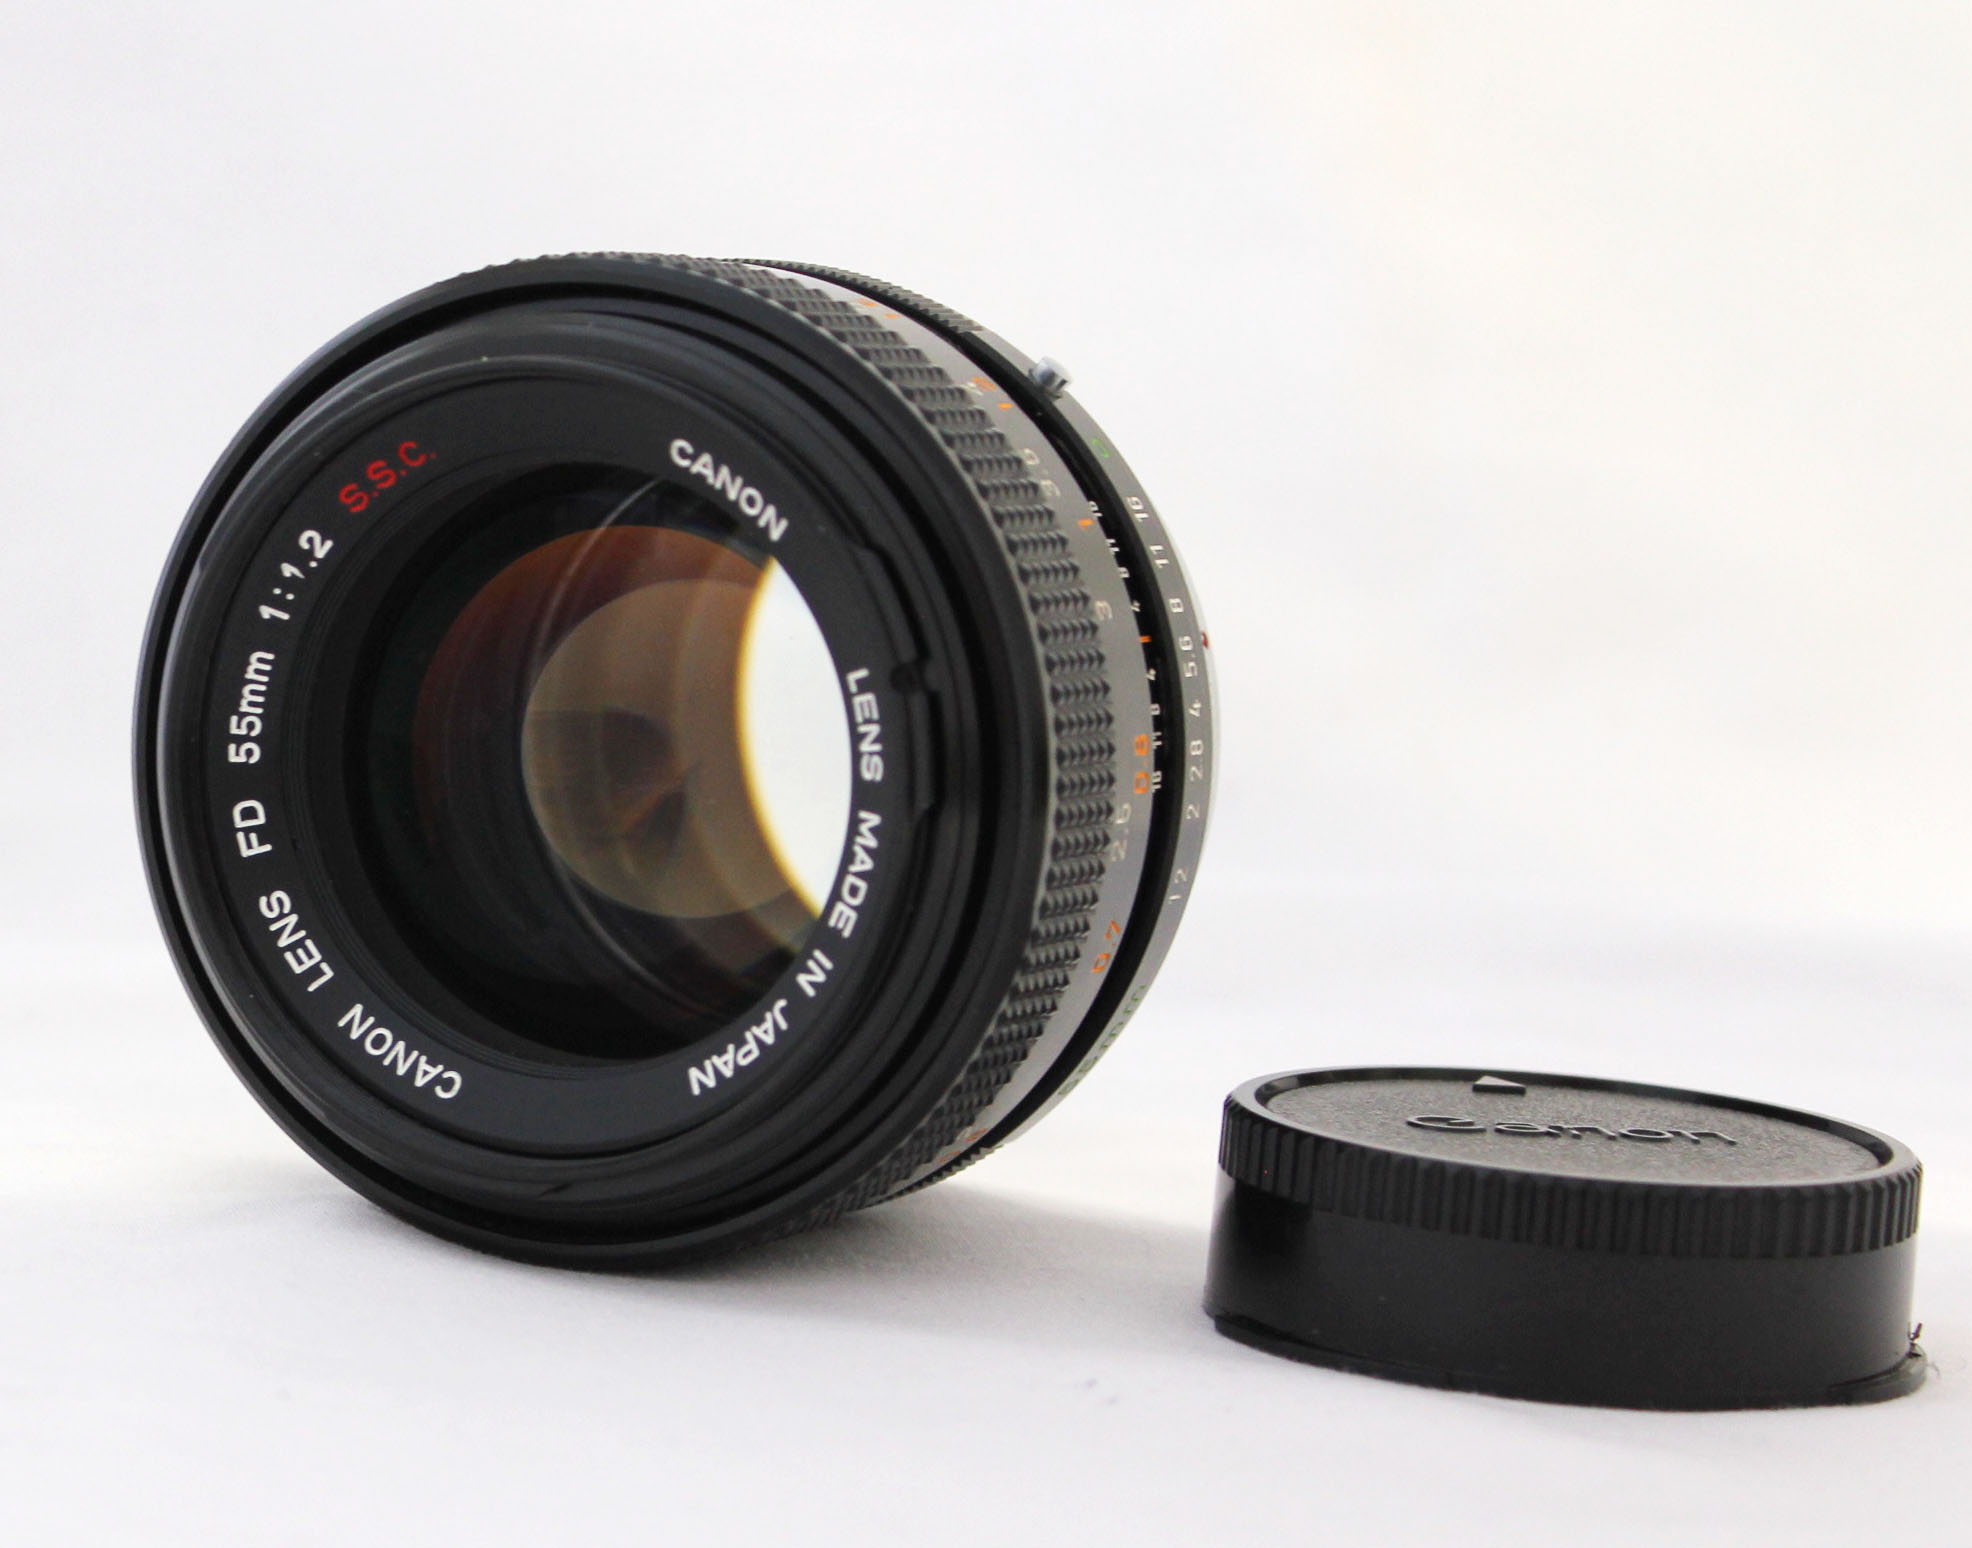 Japan Used Camera Shop | Canon FD 55mm F/1.2 S.S.C. SSC Rare "O" MF Prime Lens from Japan